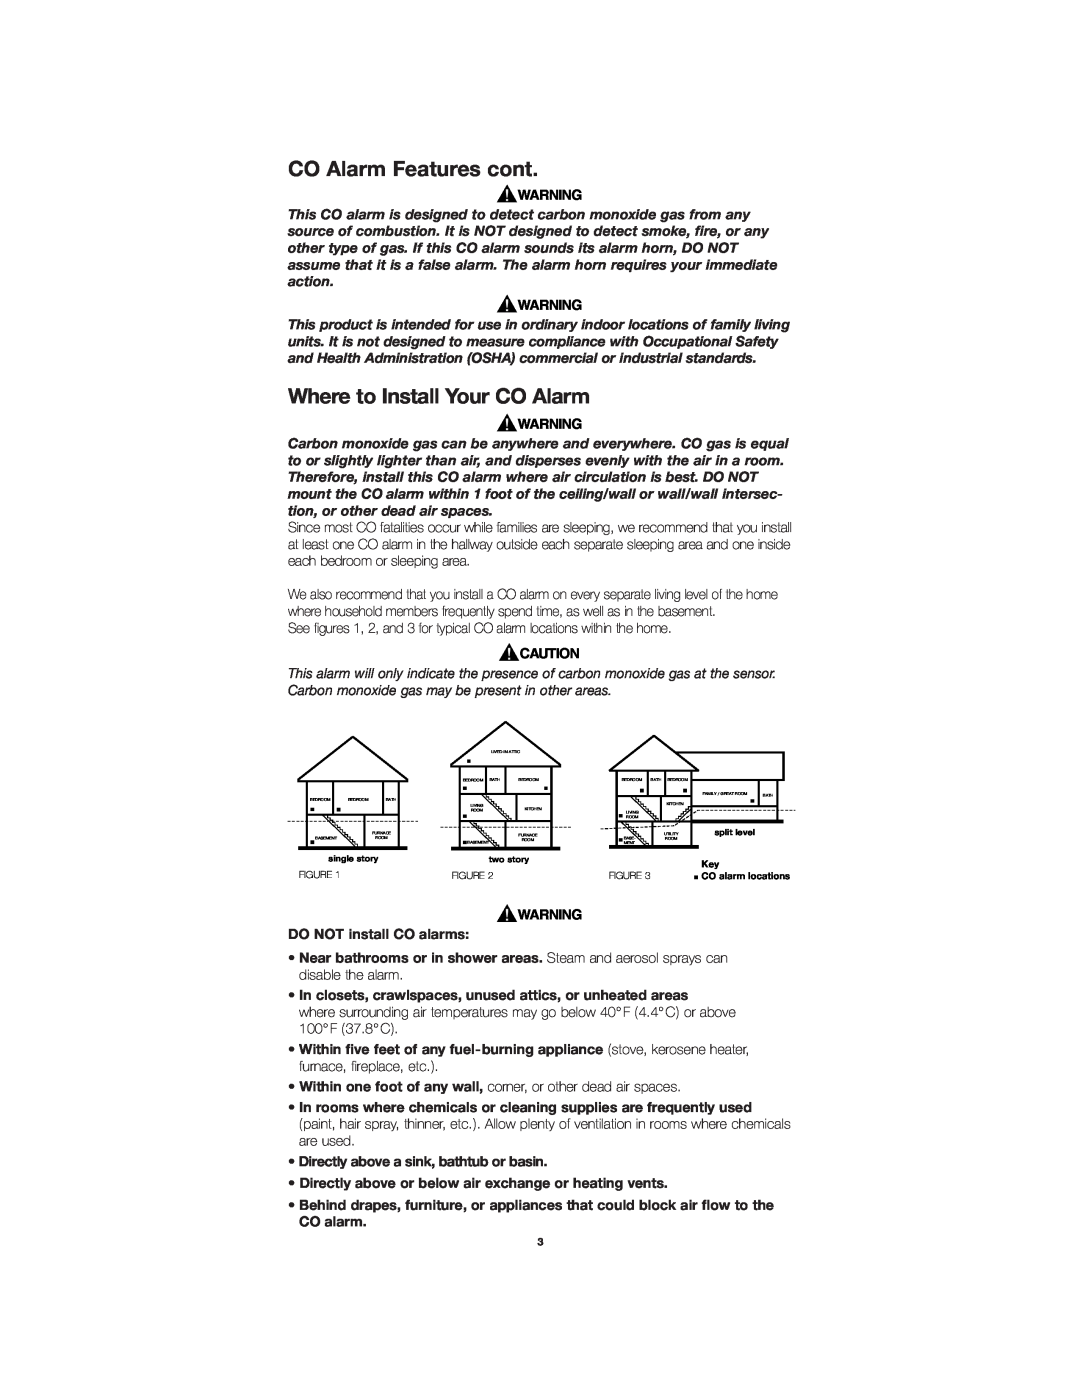 Firex COQ3, COQ6 owner manual CO Alarm Features cont, Where to Install Your CO Alarm 